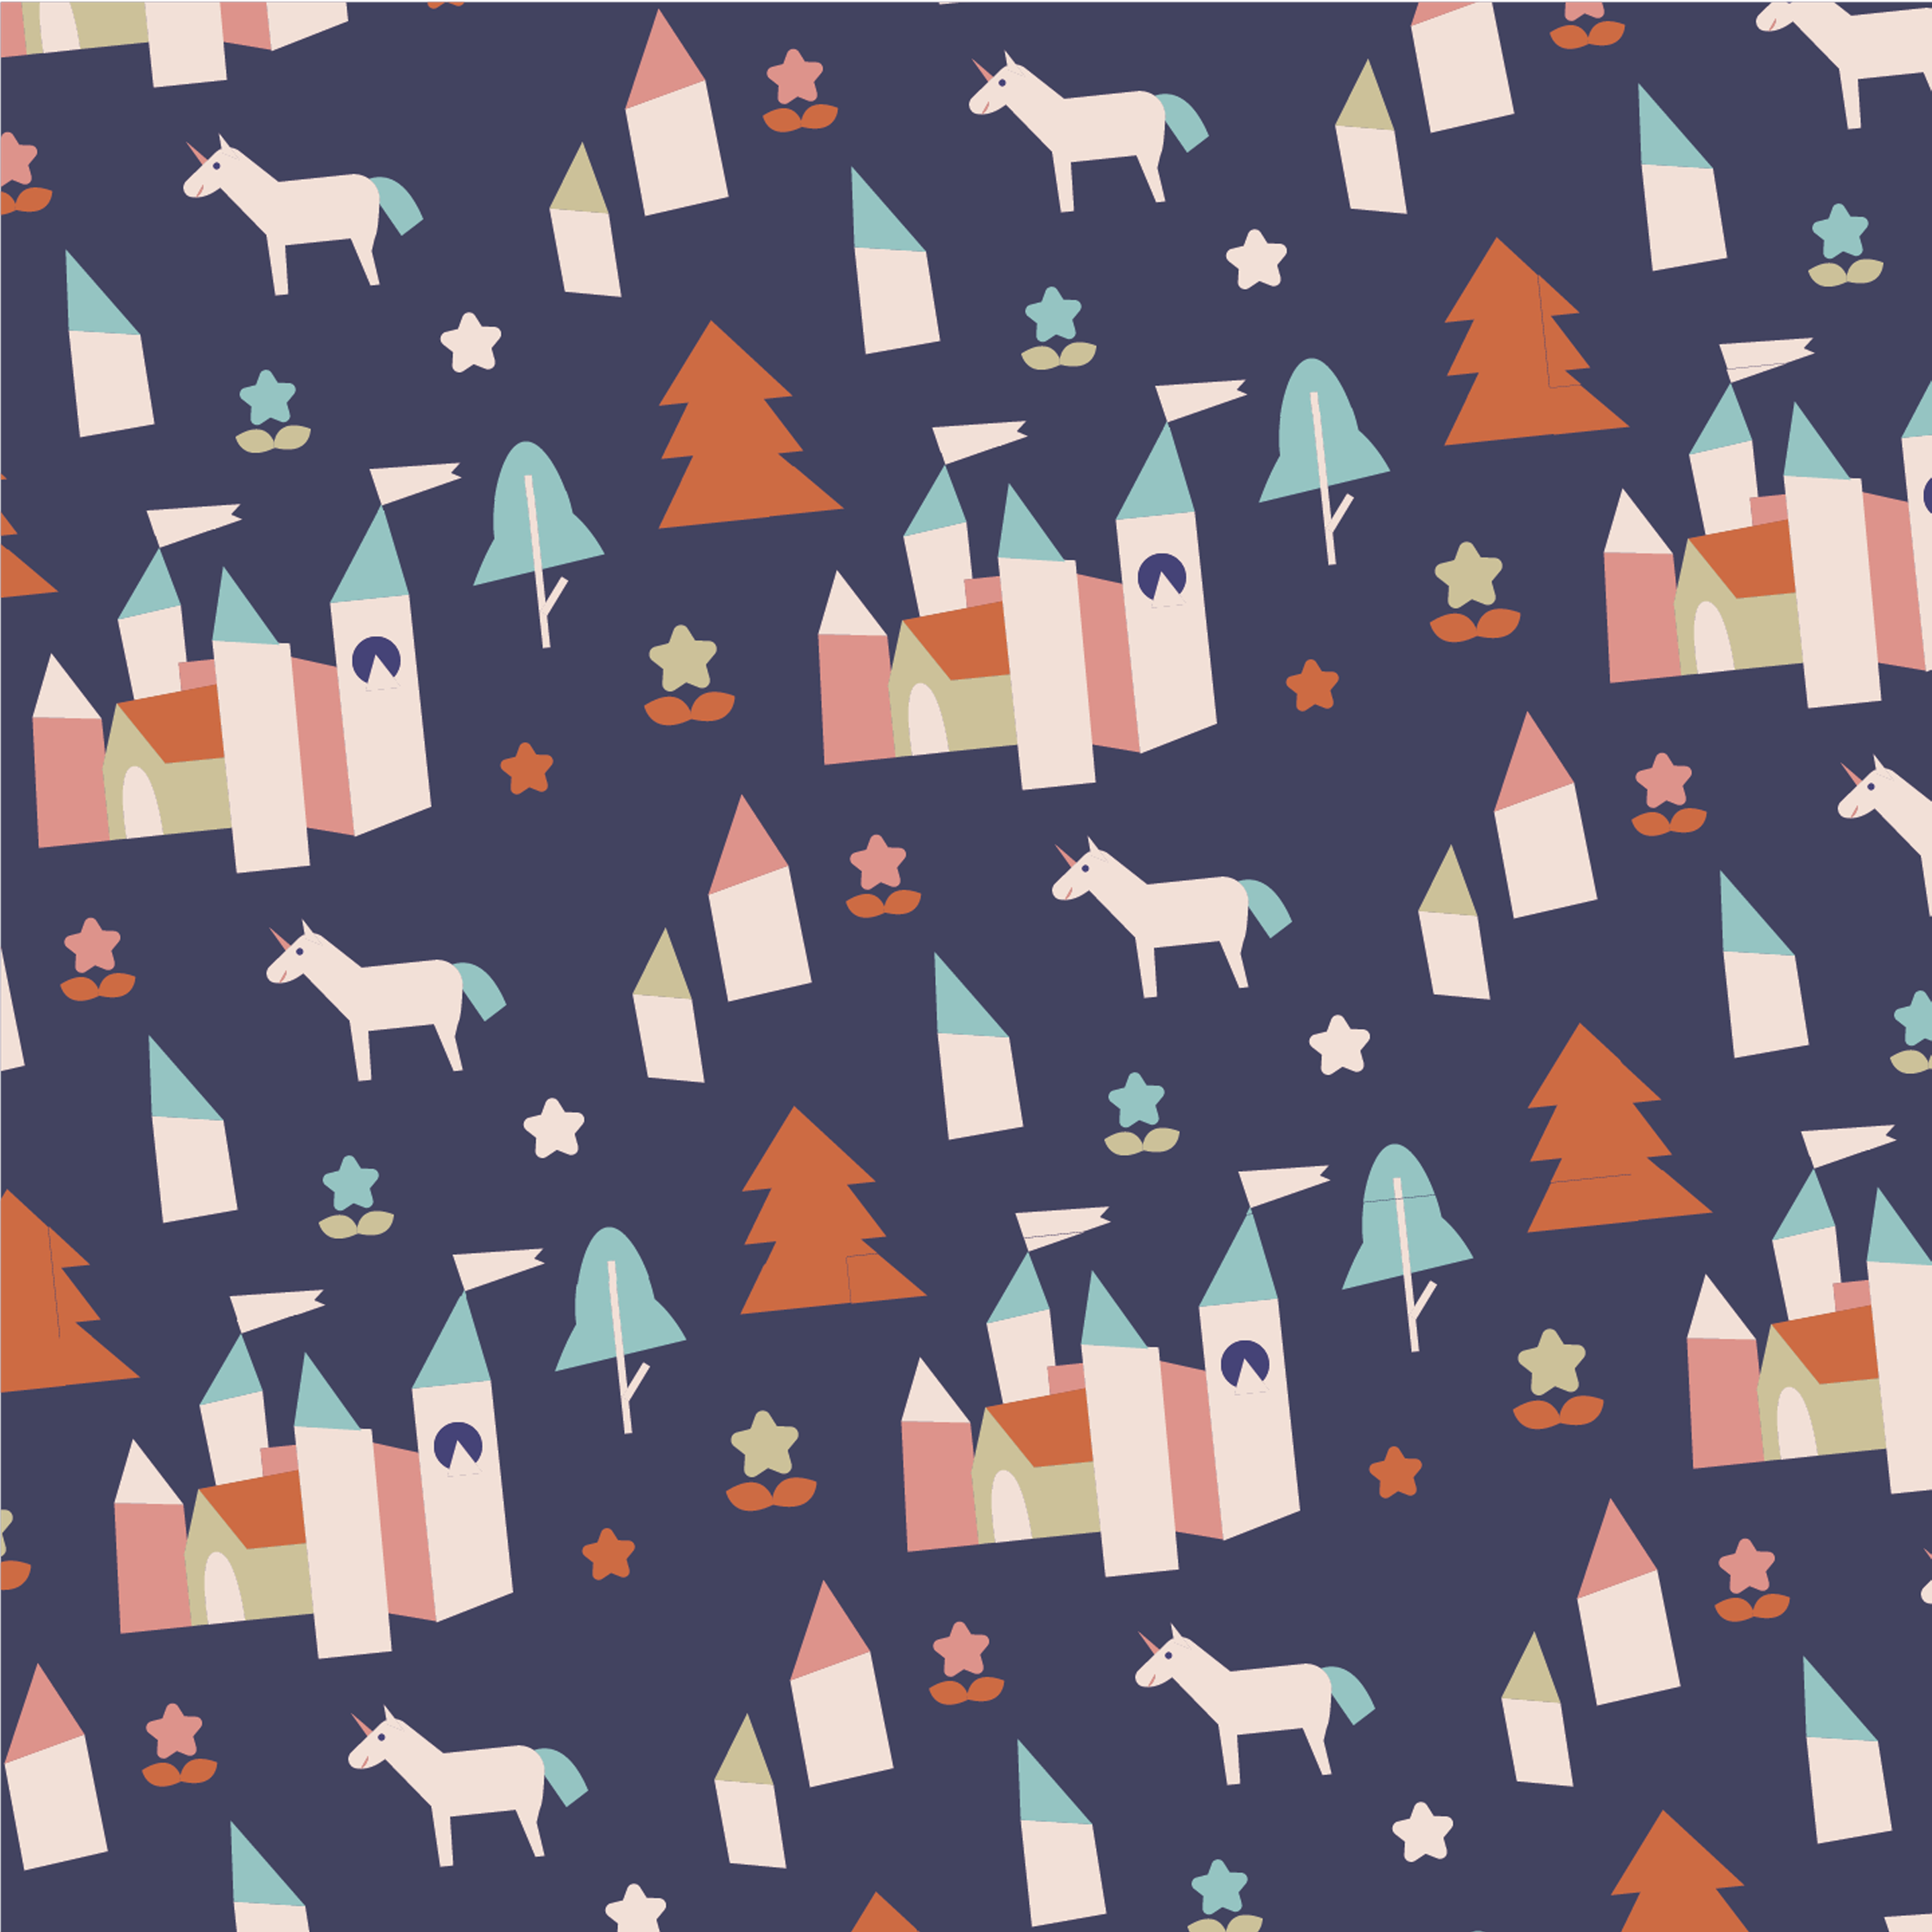 castle-and-unicorn-pattern-design-theme.png